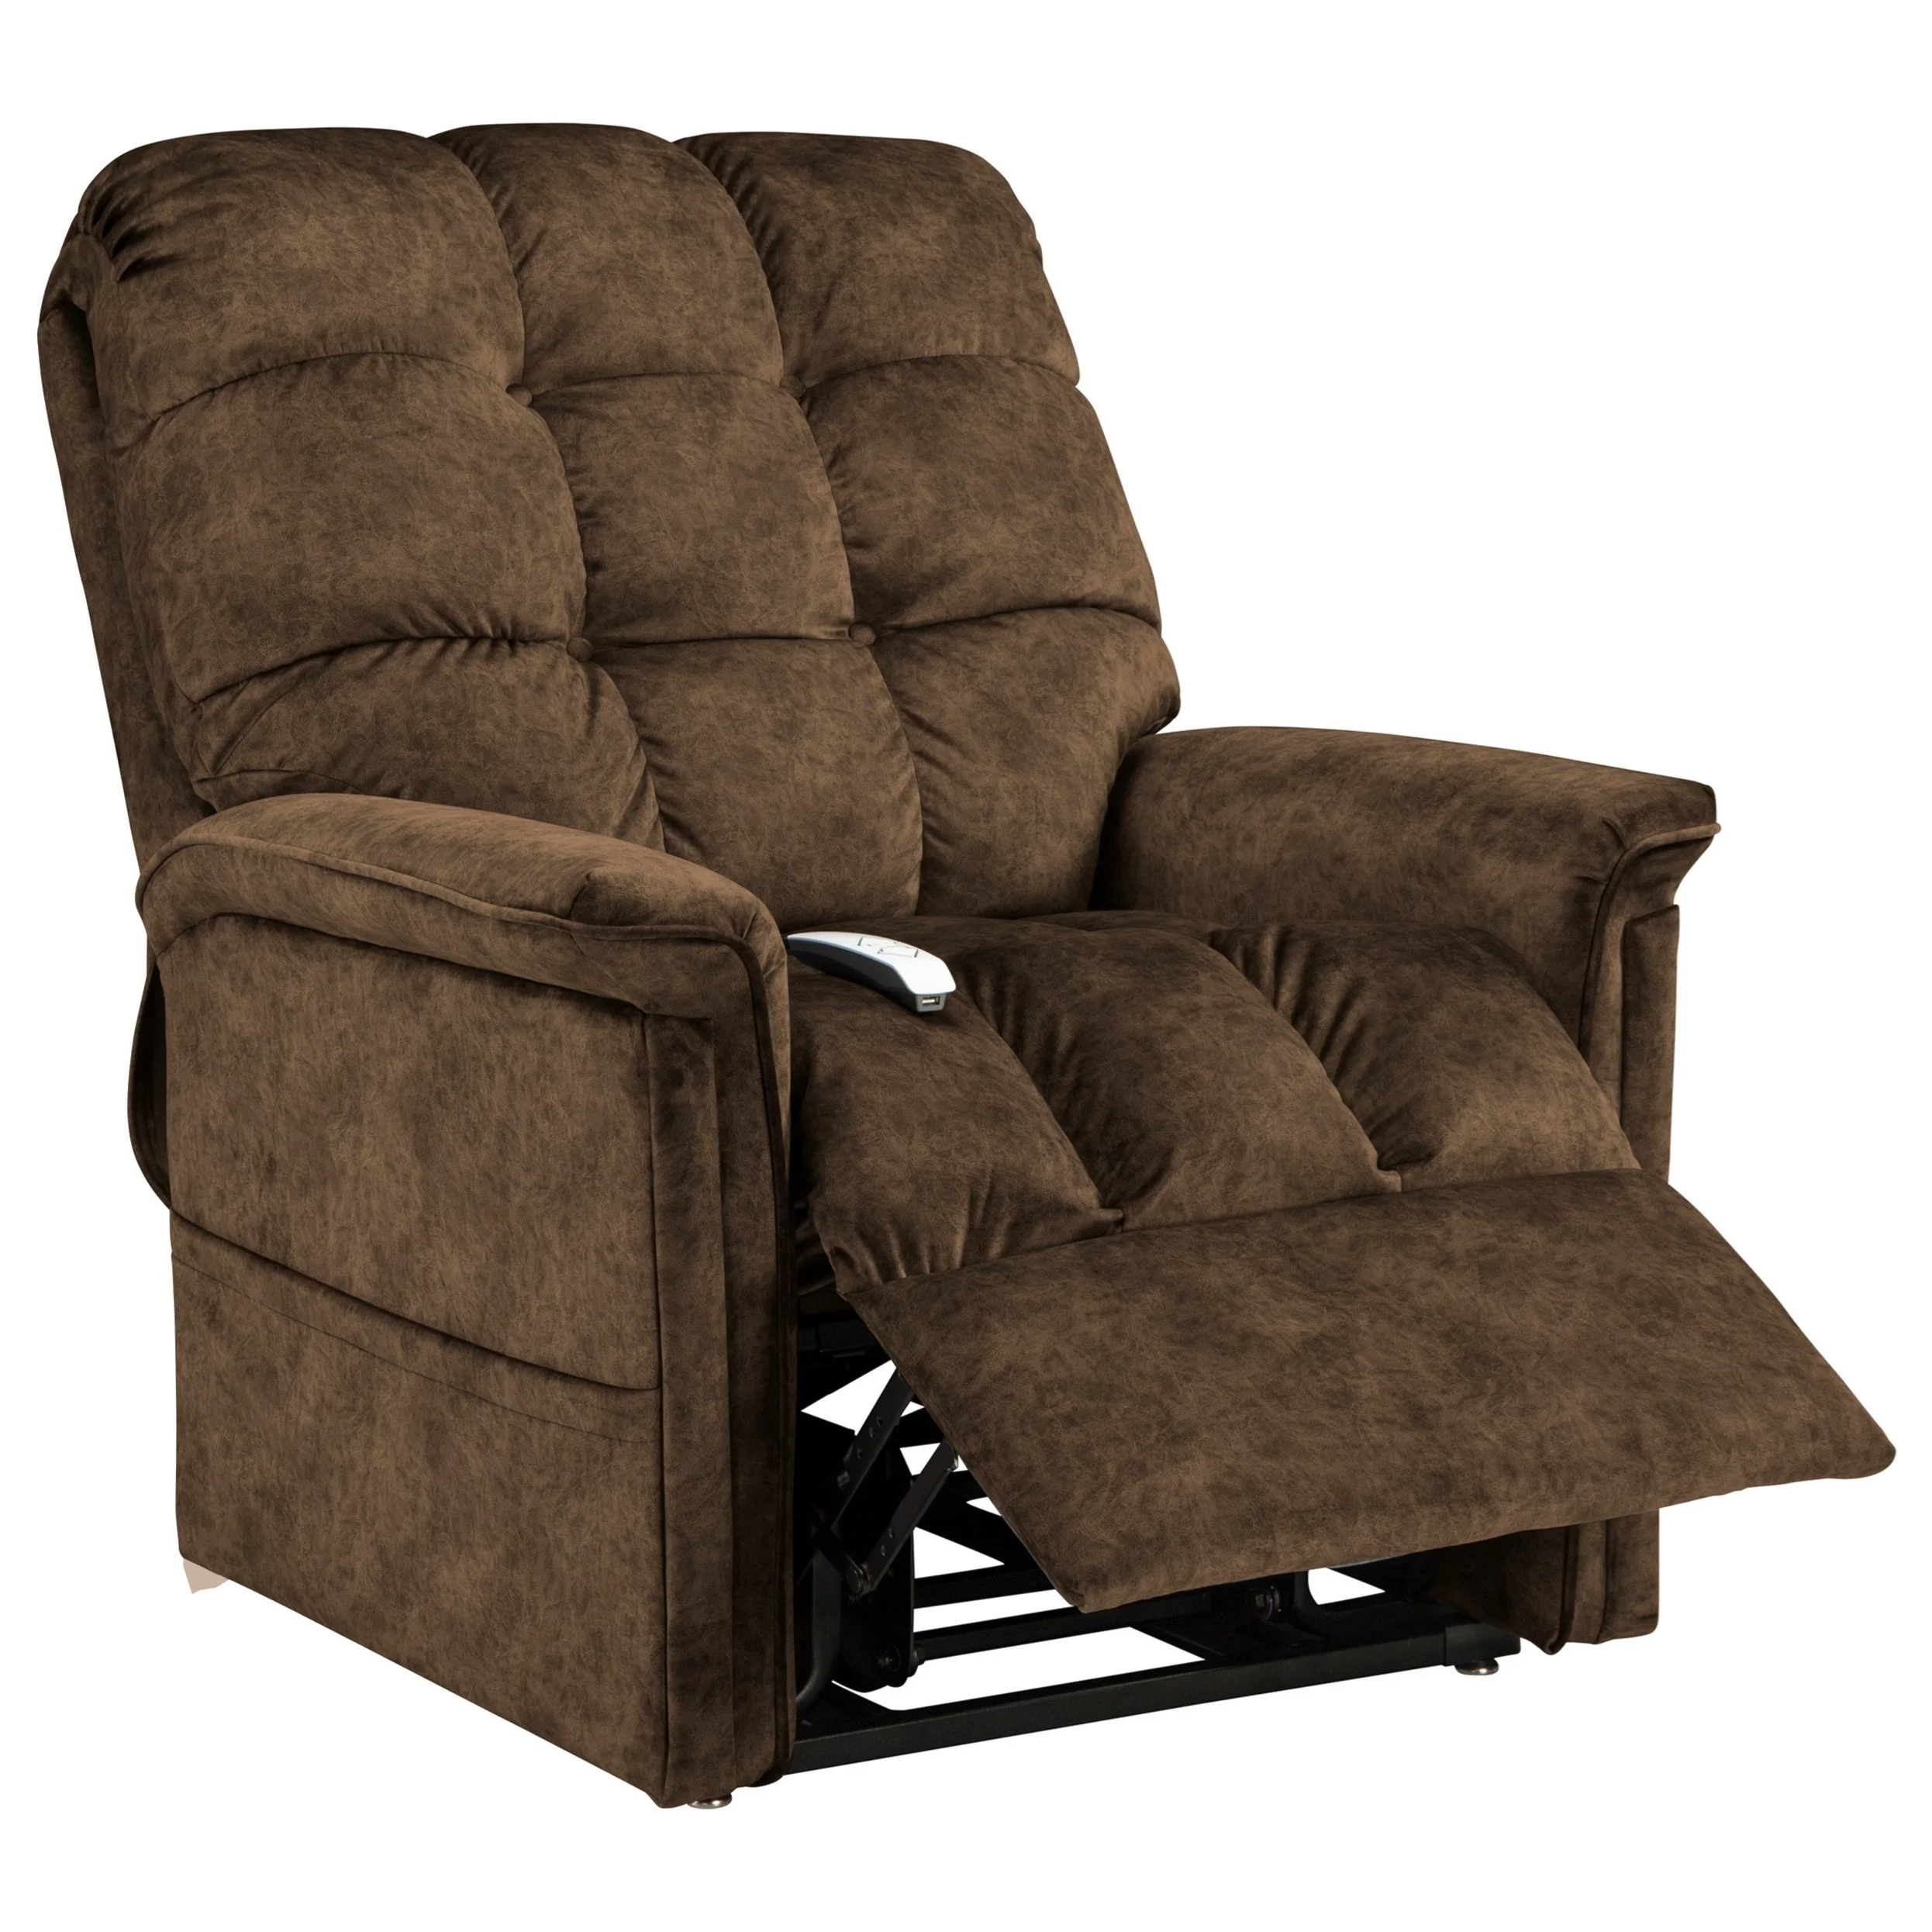 Windermere Motion Lift Chairs NM-5001 3-Position Power Reclining Lift Chair  with Biscuit Back, Dunk & Bright Furniture